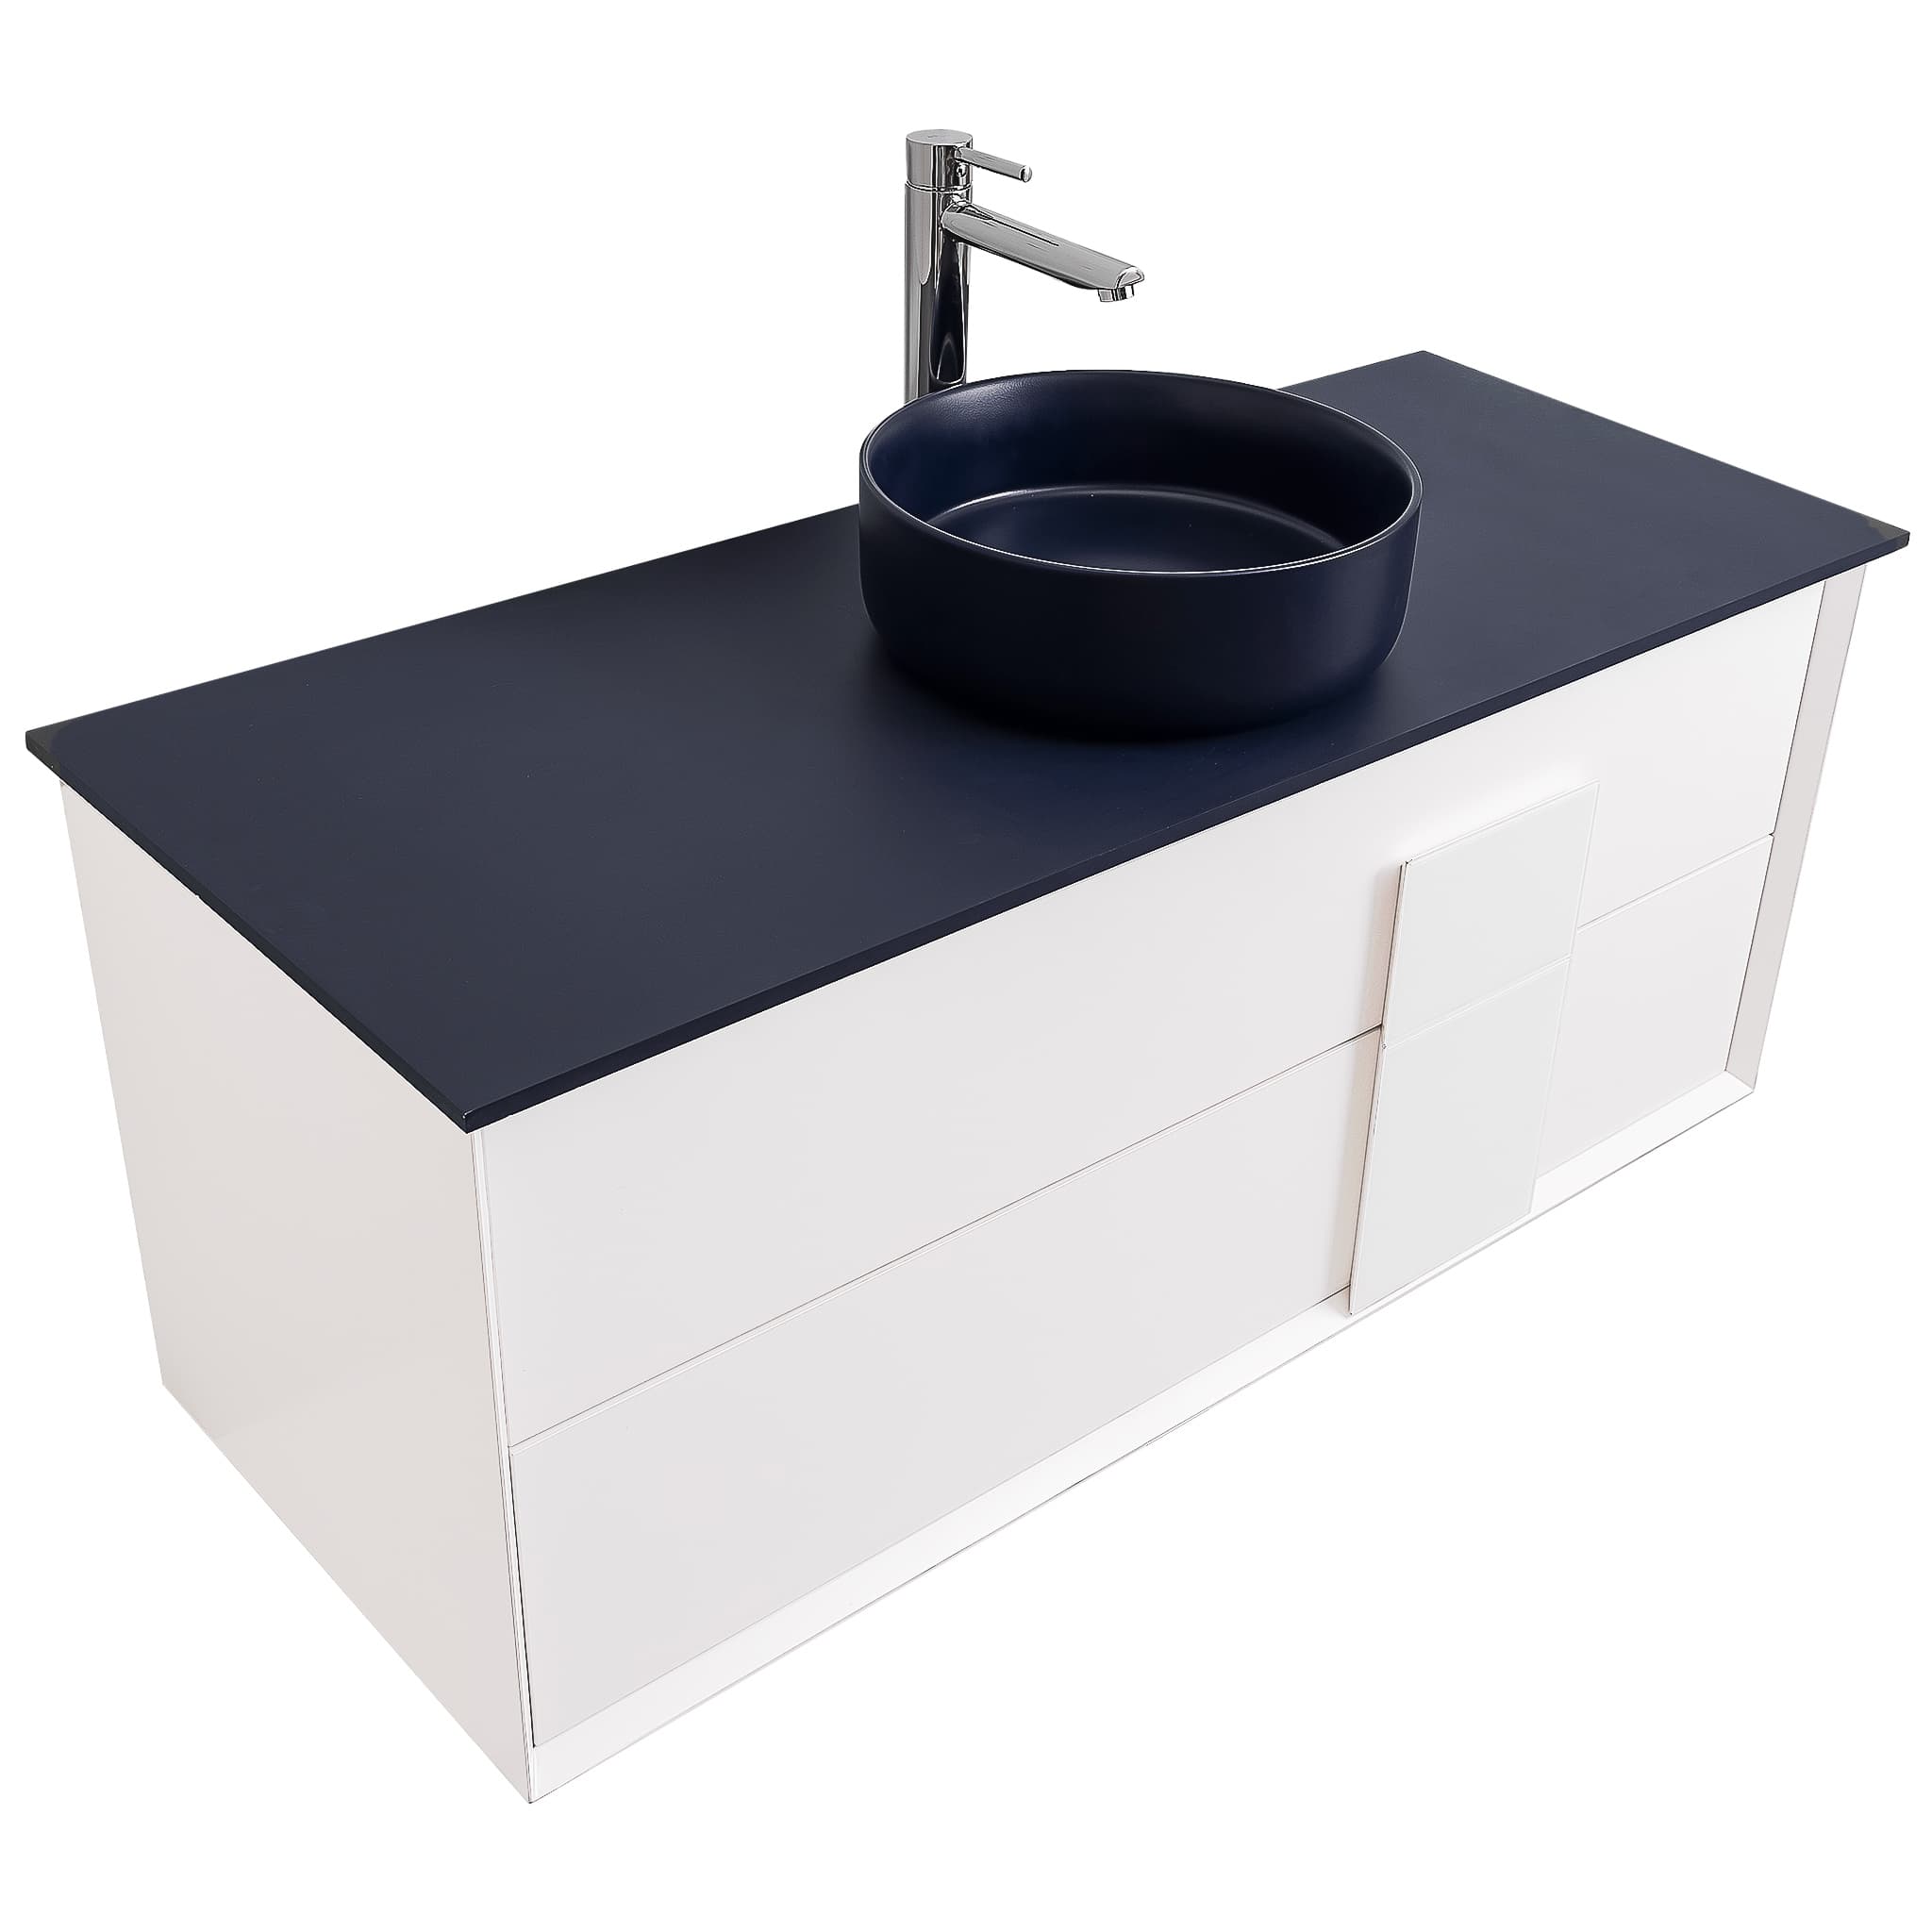 Piazza 47.5 Matte White With White Handle Cabinet, Ares Navy Blue Top and Ares Navy Blue Ceramic Basin, Wall Mounted Modern Vanity Set